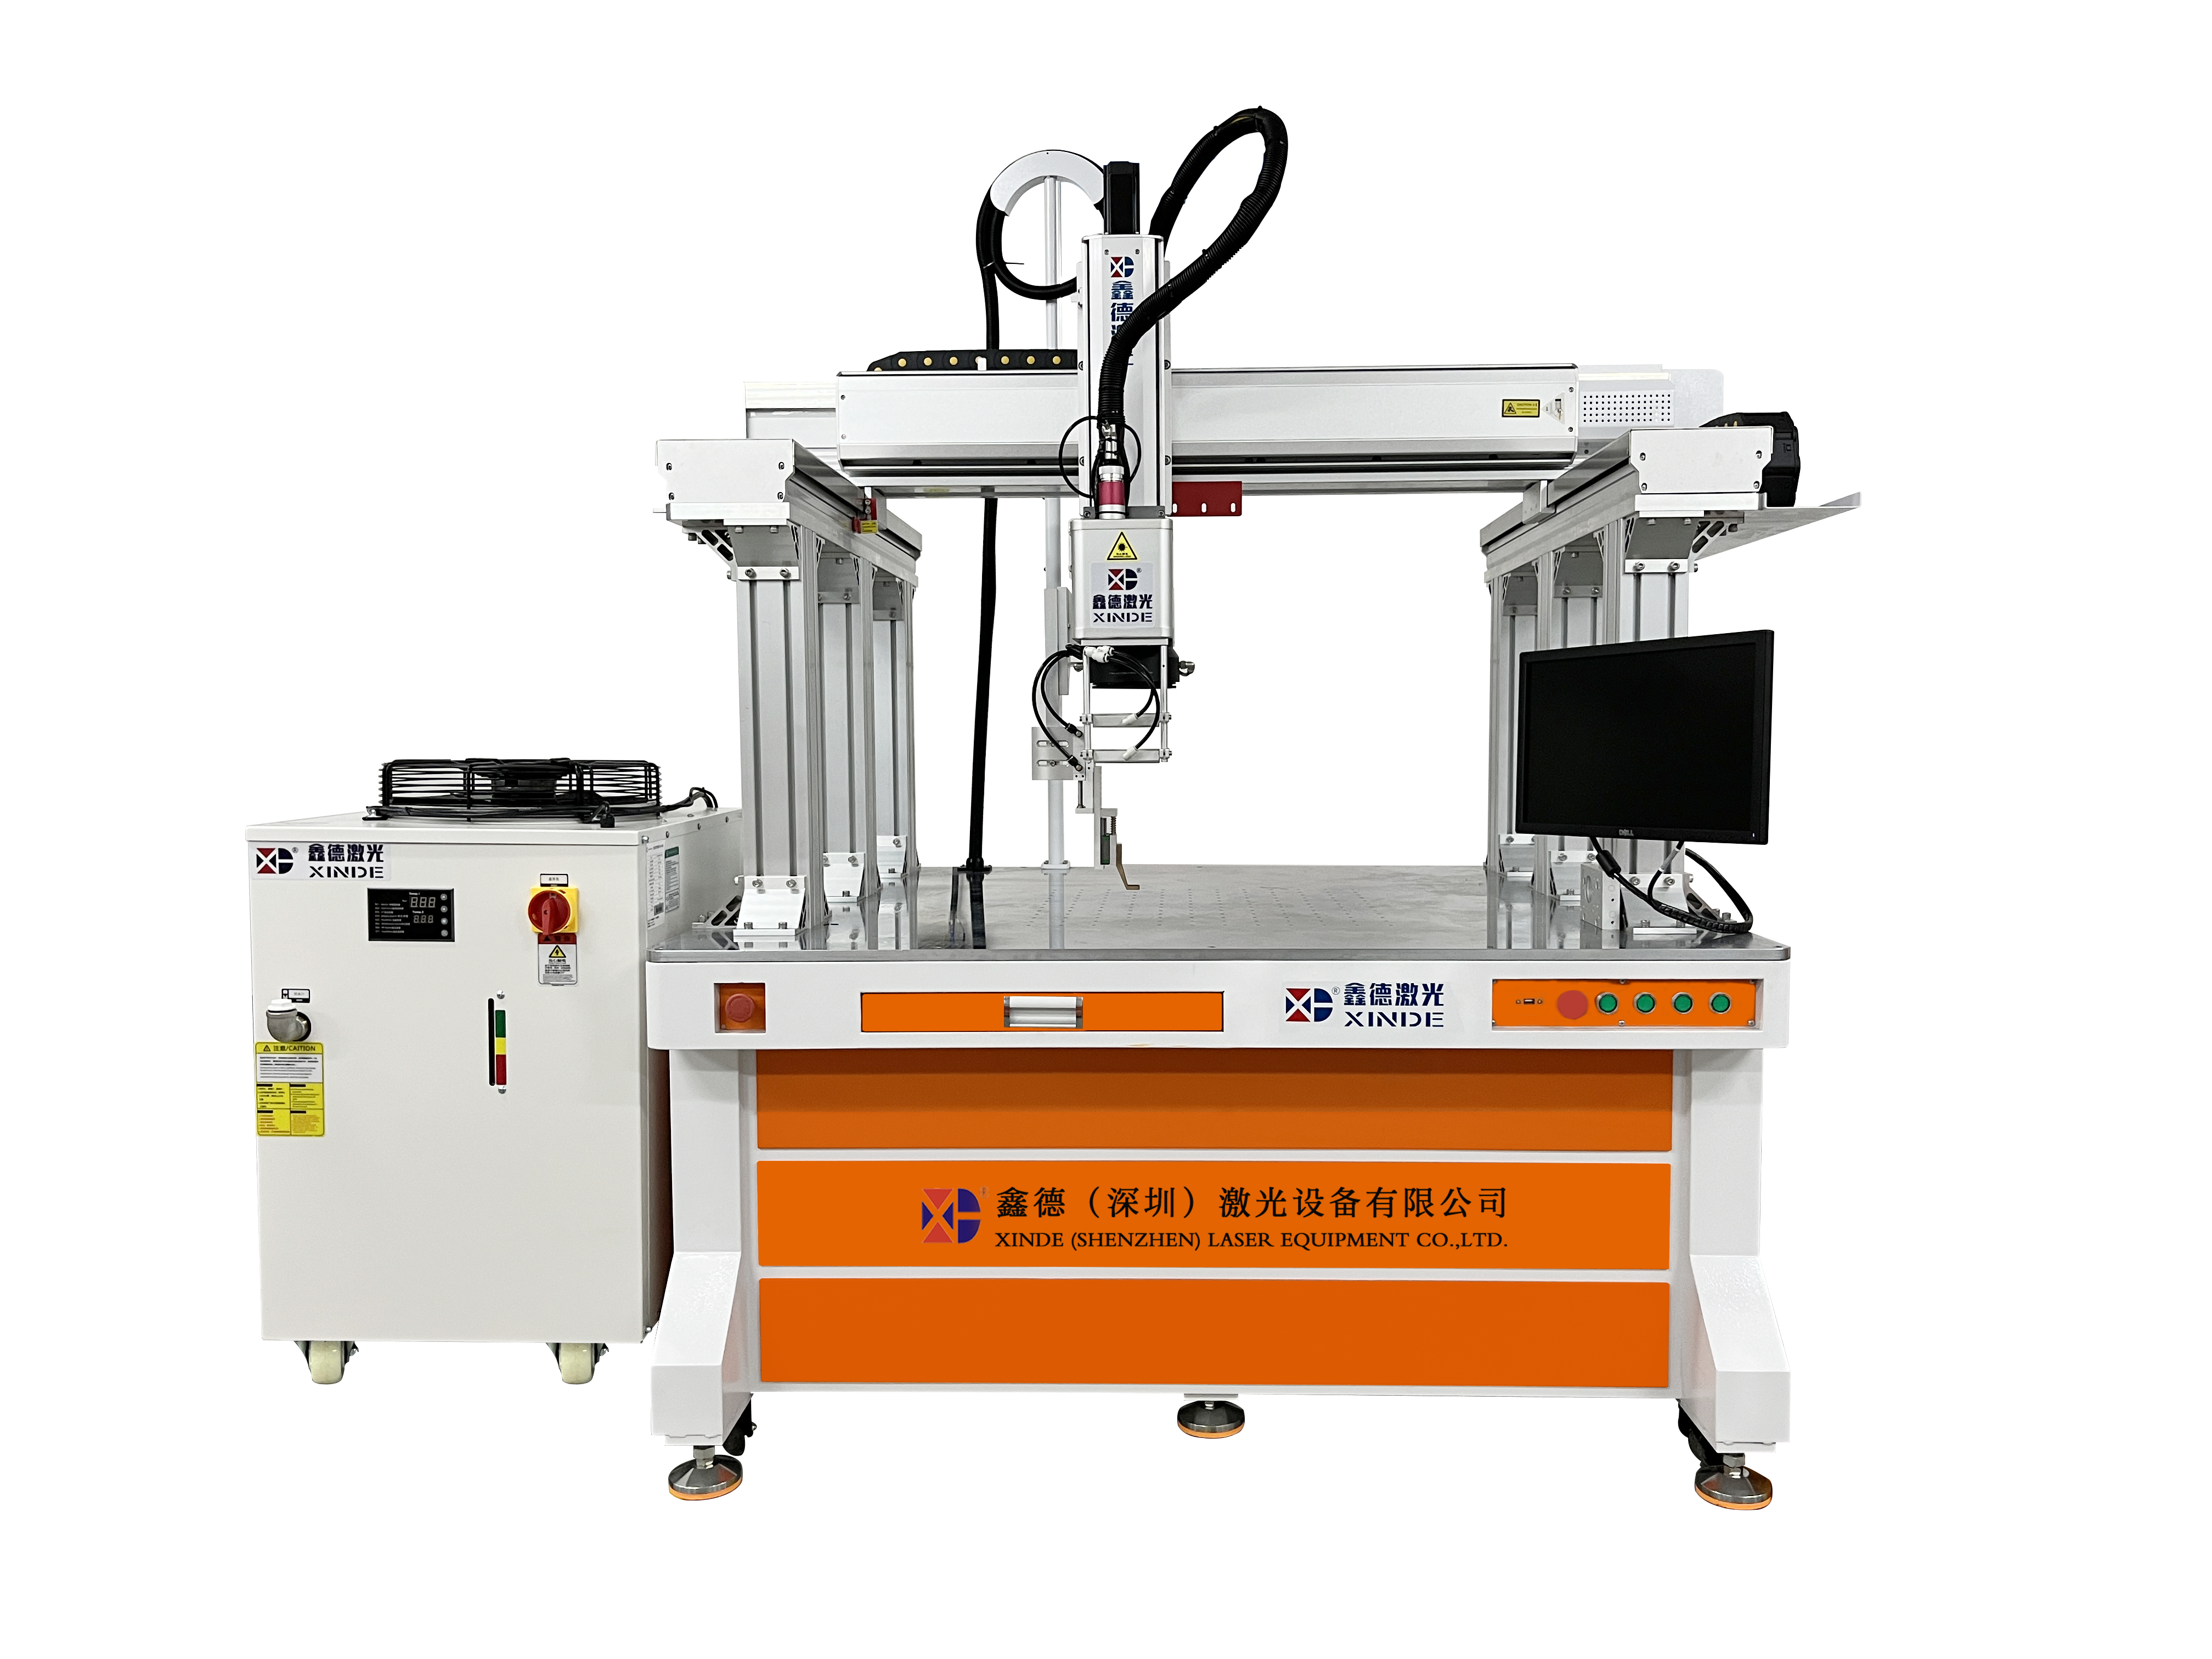 Choose laser welding machine should pay attention to what problems